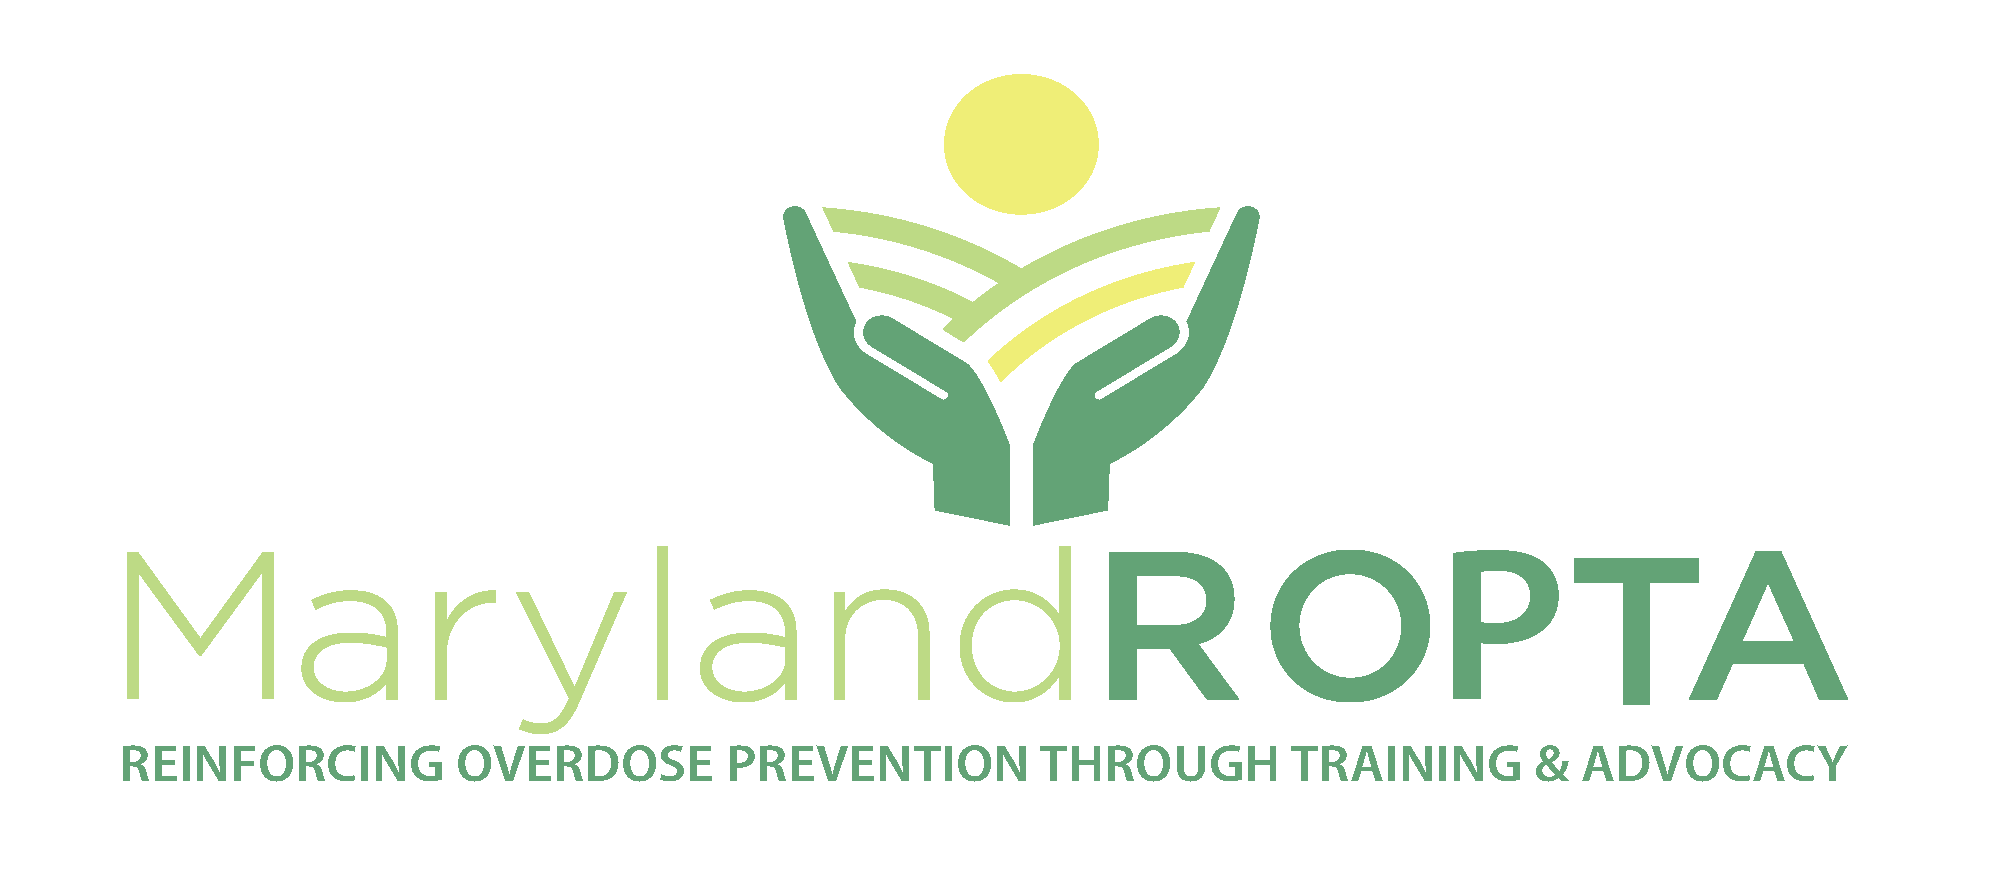 Reinforcing Overdose Prevention through Training and Advocacy (ROPTA)